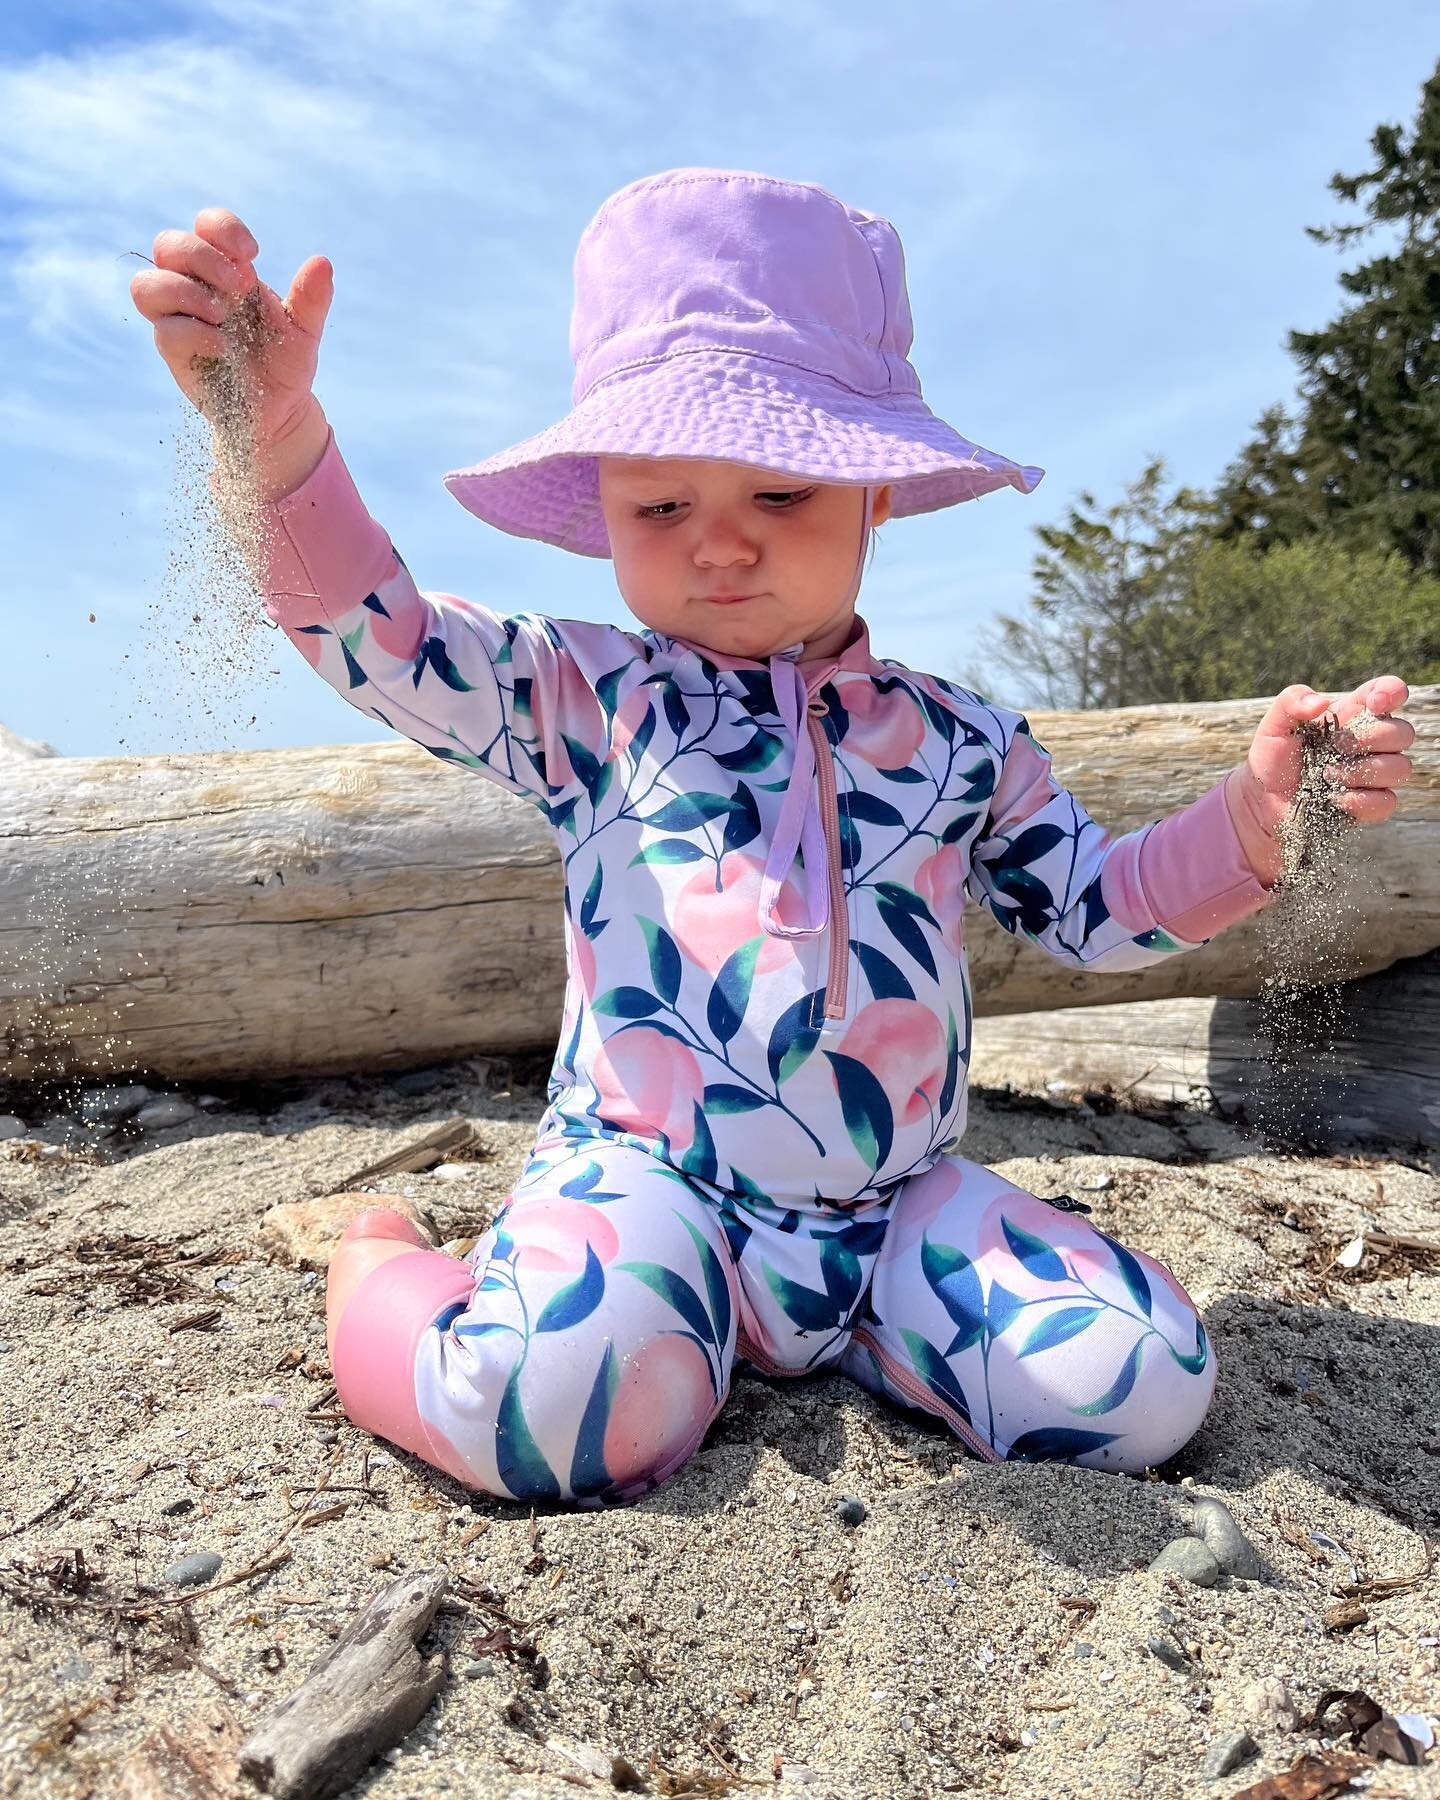 This smart little Peanut loves playing outside, going to the beach and she knows her name! Paige = Me! So cute! #babyp #babypaige #littlep #cutebaby #babygirl #summer #beachbabe #babygirl🎀 #me @brittniquinn_ @anthonyfiddler @paigedionfiddler